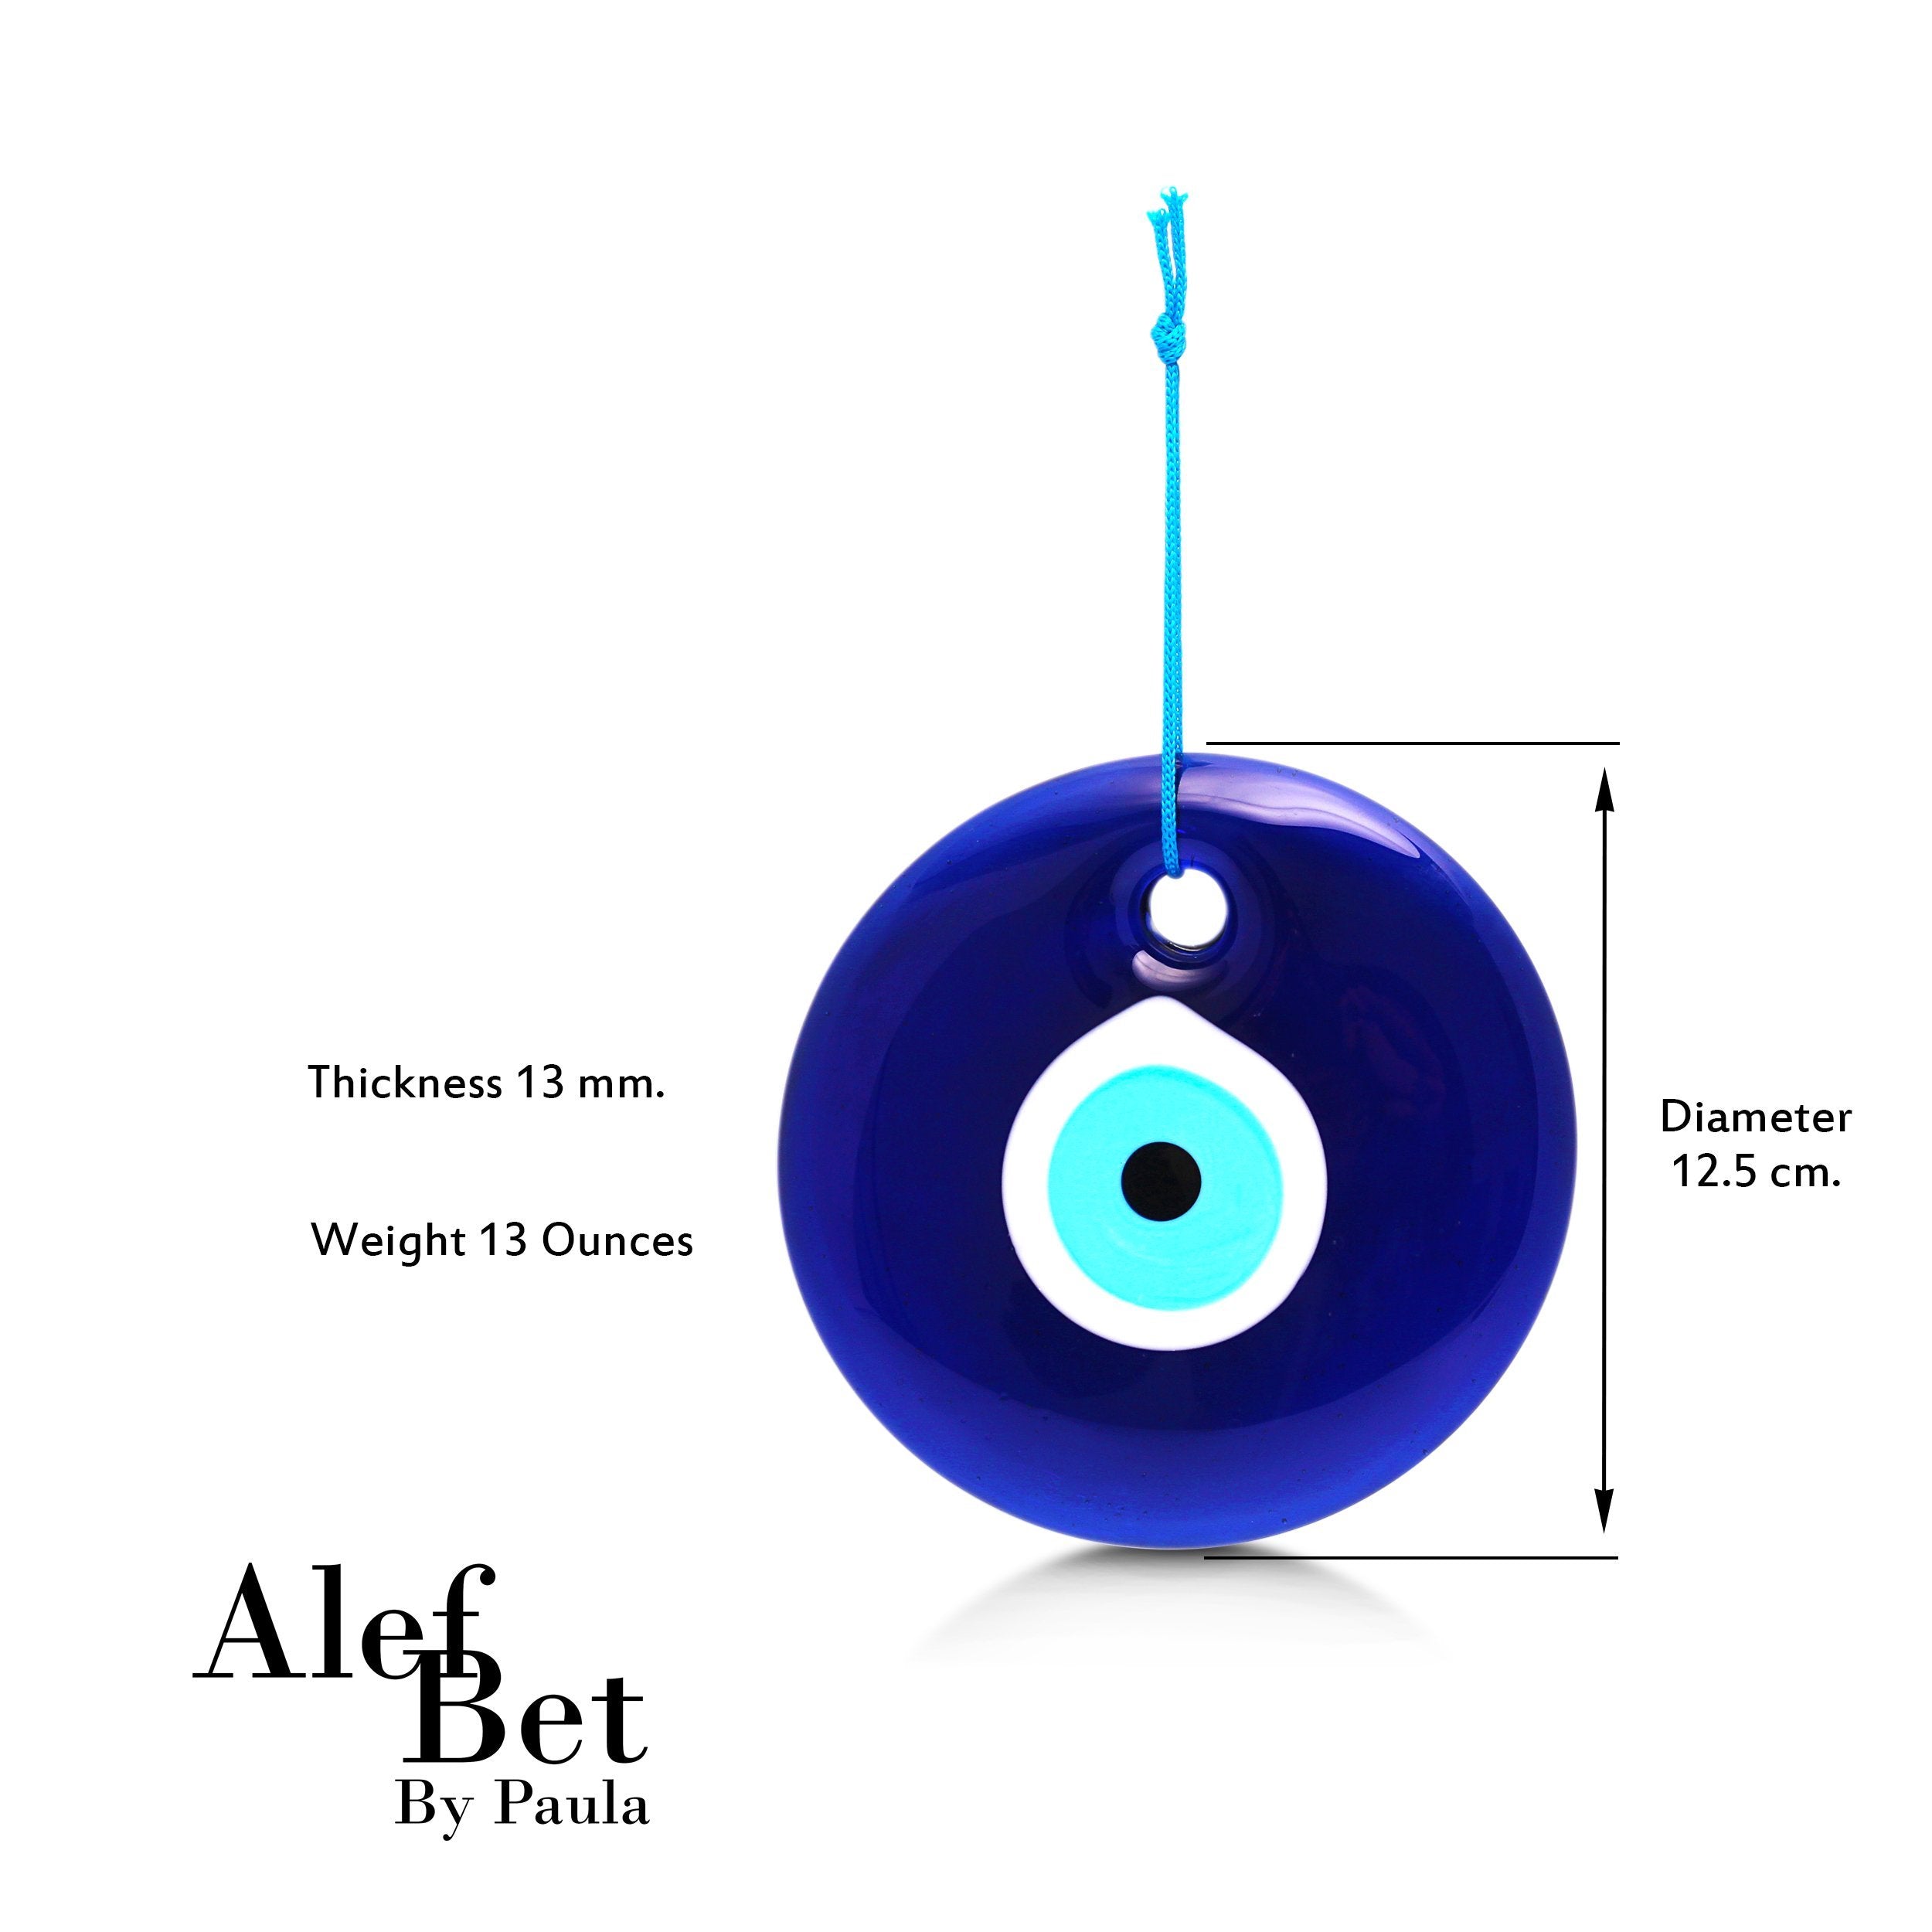 size of the evil eye 